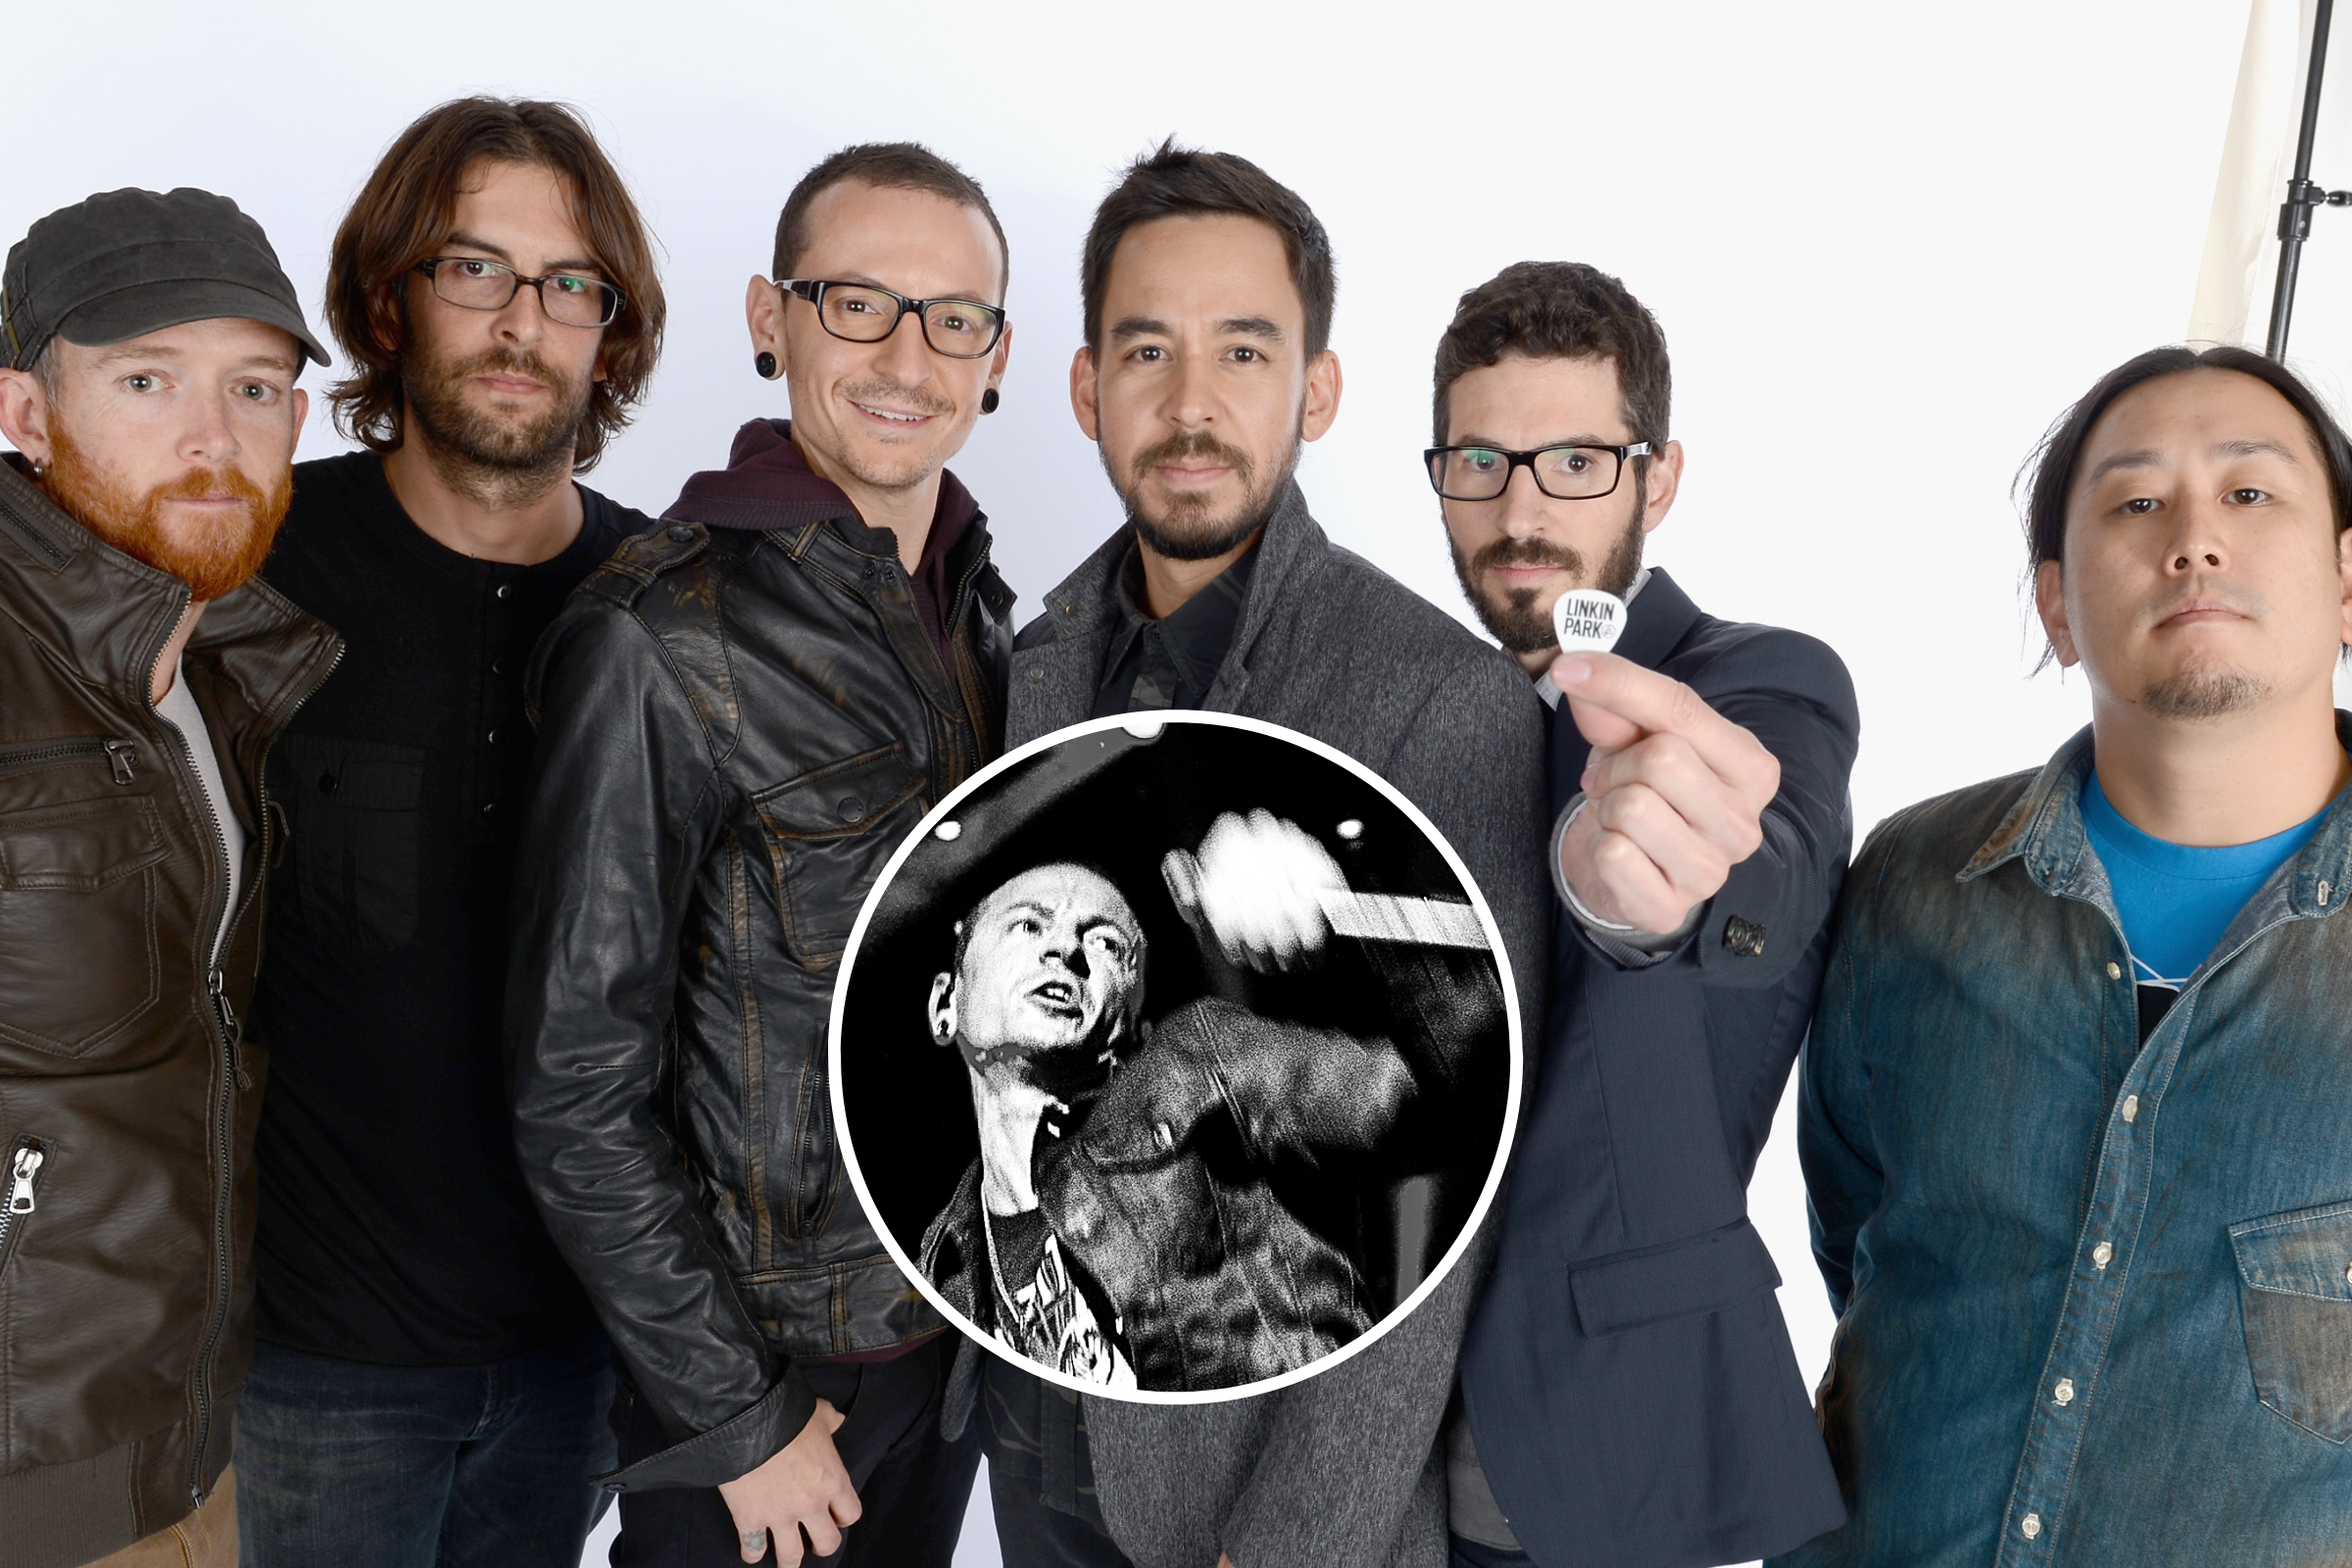 Linkin Park Release New Song 'Lost': What To Know About 'Meteora